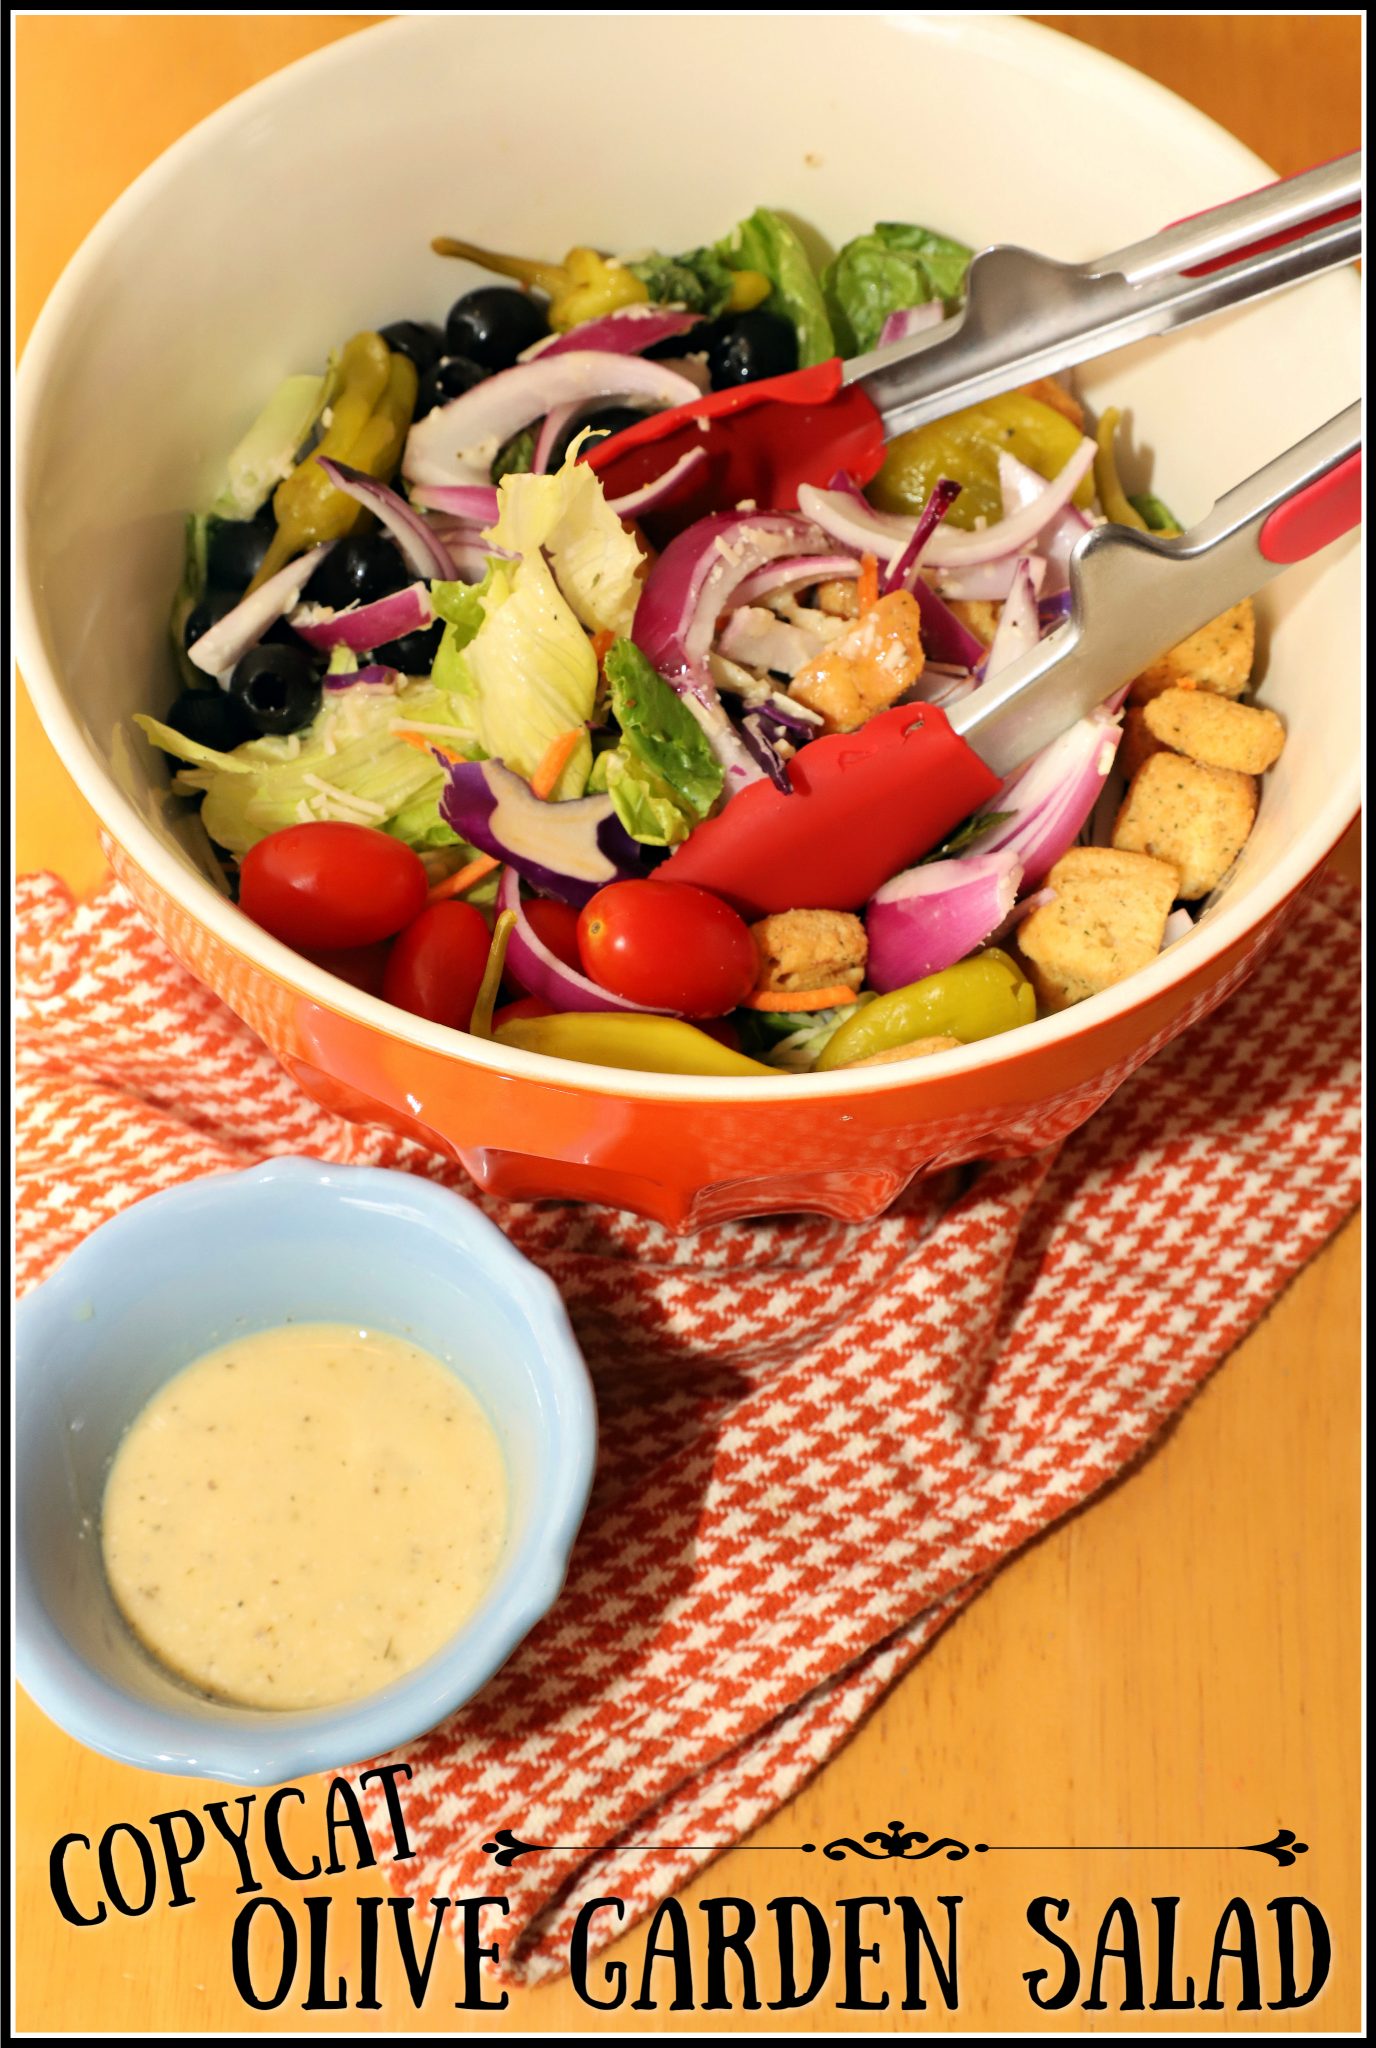 Olive Garden Salad Dressing and Italian Margaritas - For the Love of Food